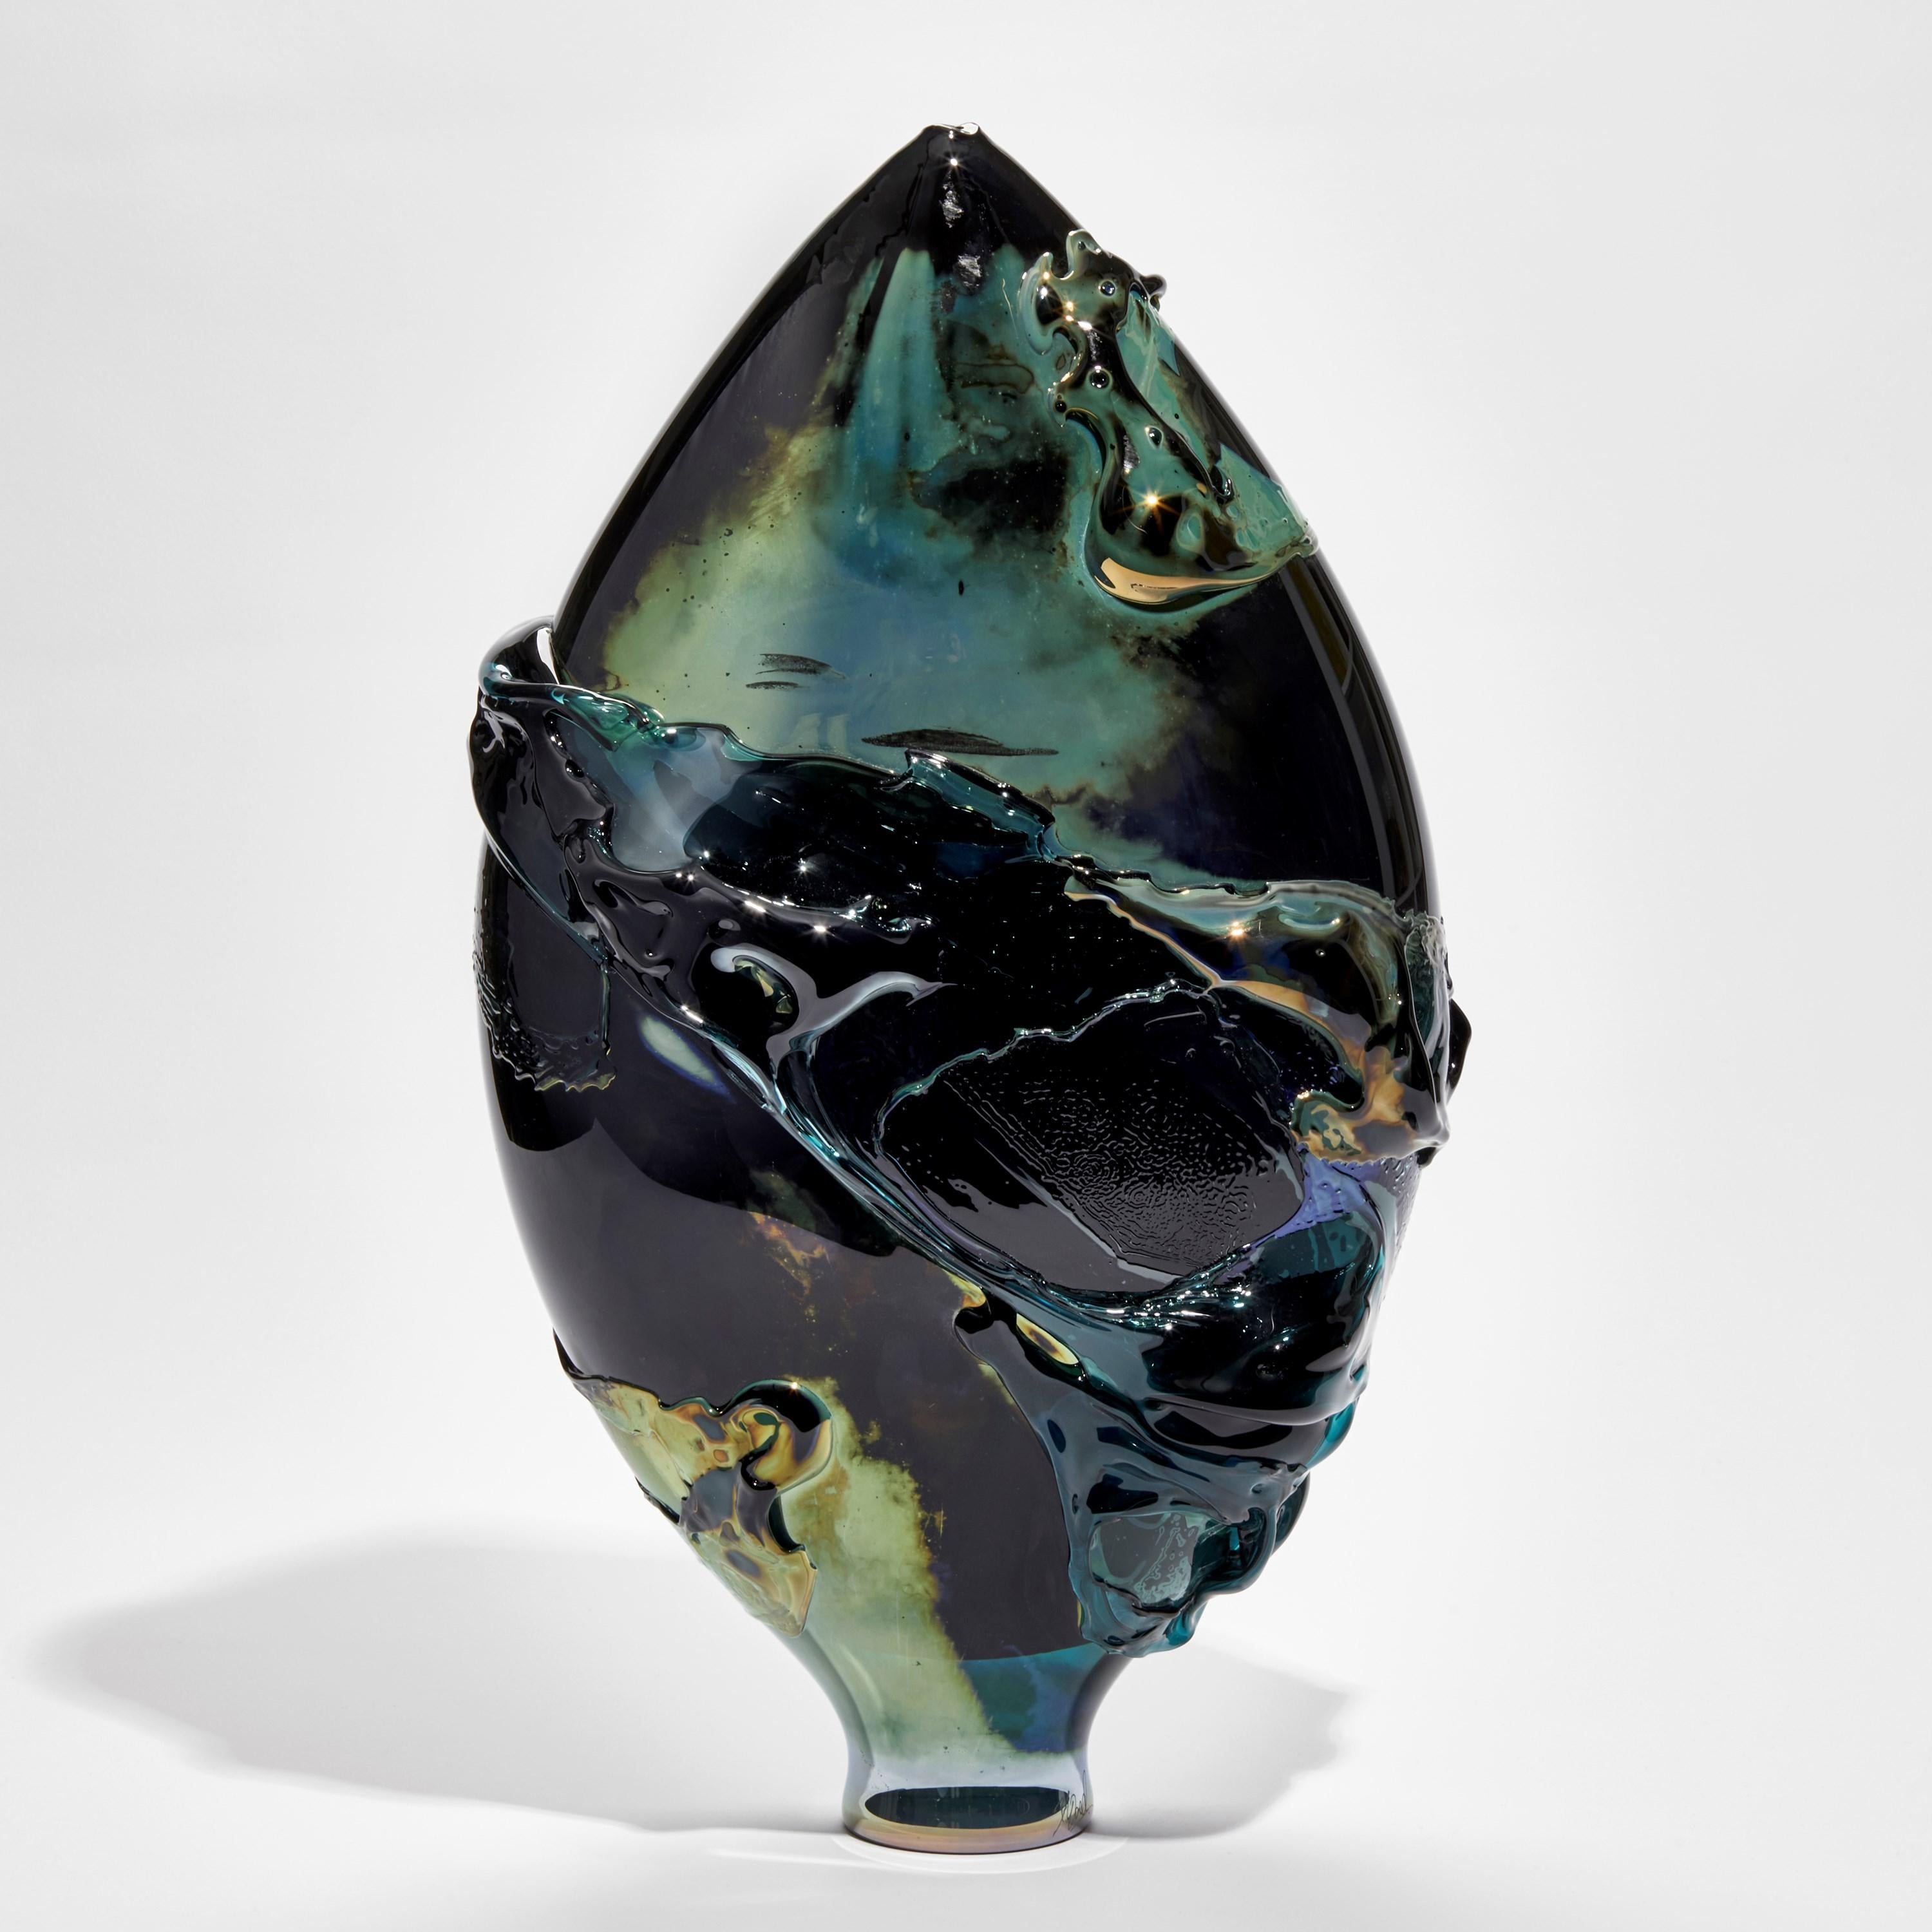 Black Sea II is a unique black, sea green and aqua sculptural glass vessel with a lustrous metallic finish by the British artist, Bethany Wood. An equal passion for painting physically inspires how she controls and manipulates her glass. Recreating